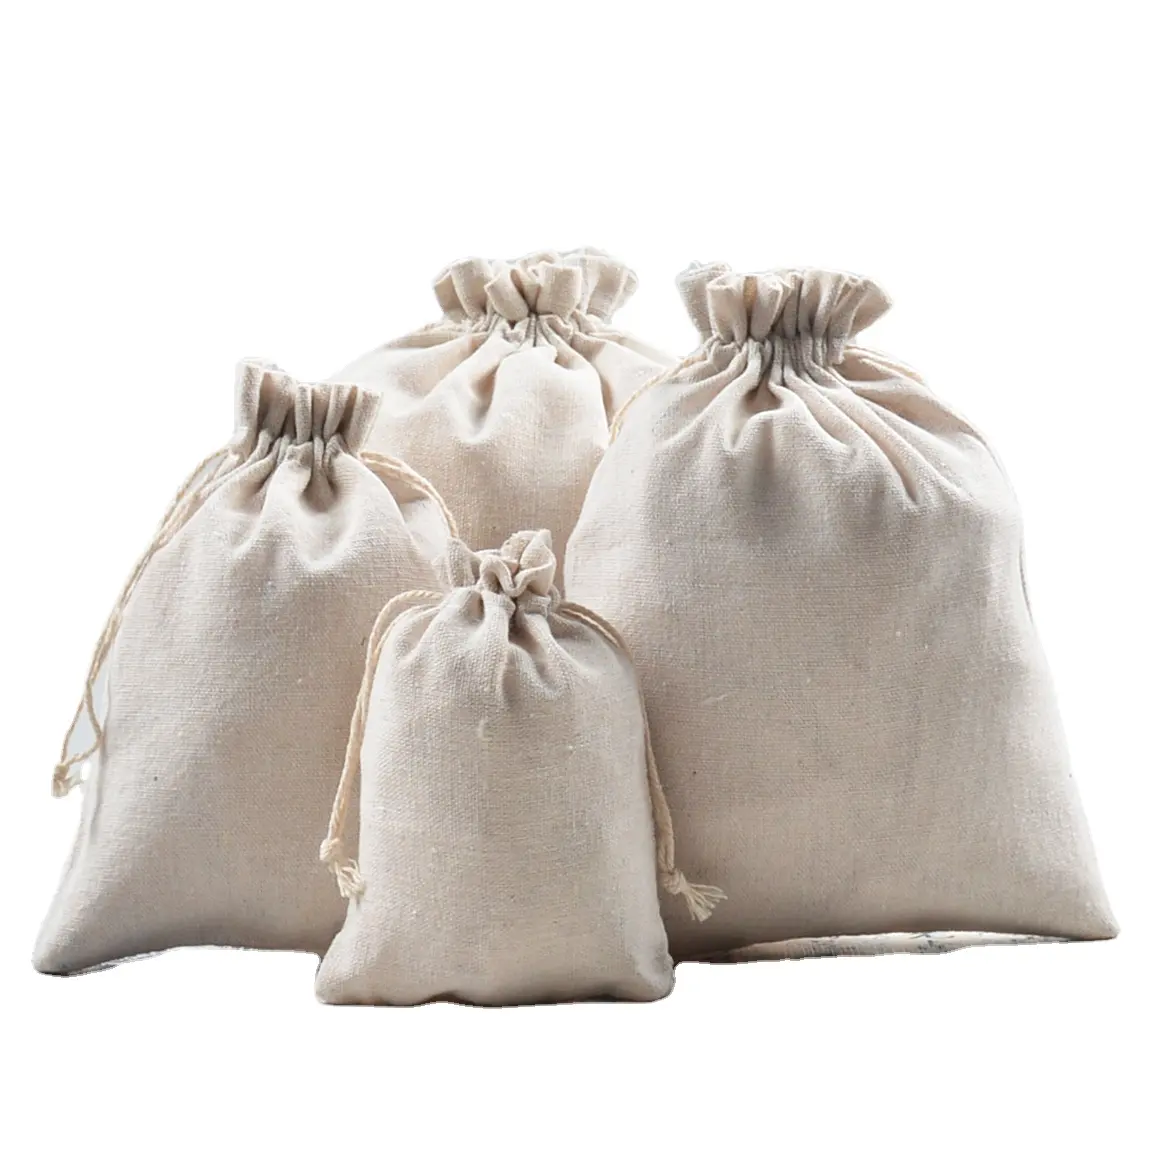 Cotton Canvas Bags Dust Proof Drawstring Pouch Muslin Cotton Rope Bags Cosmetic Pouch Reusable Small Natural Bag